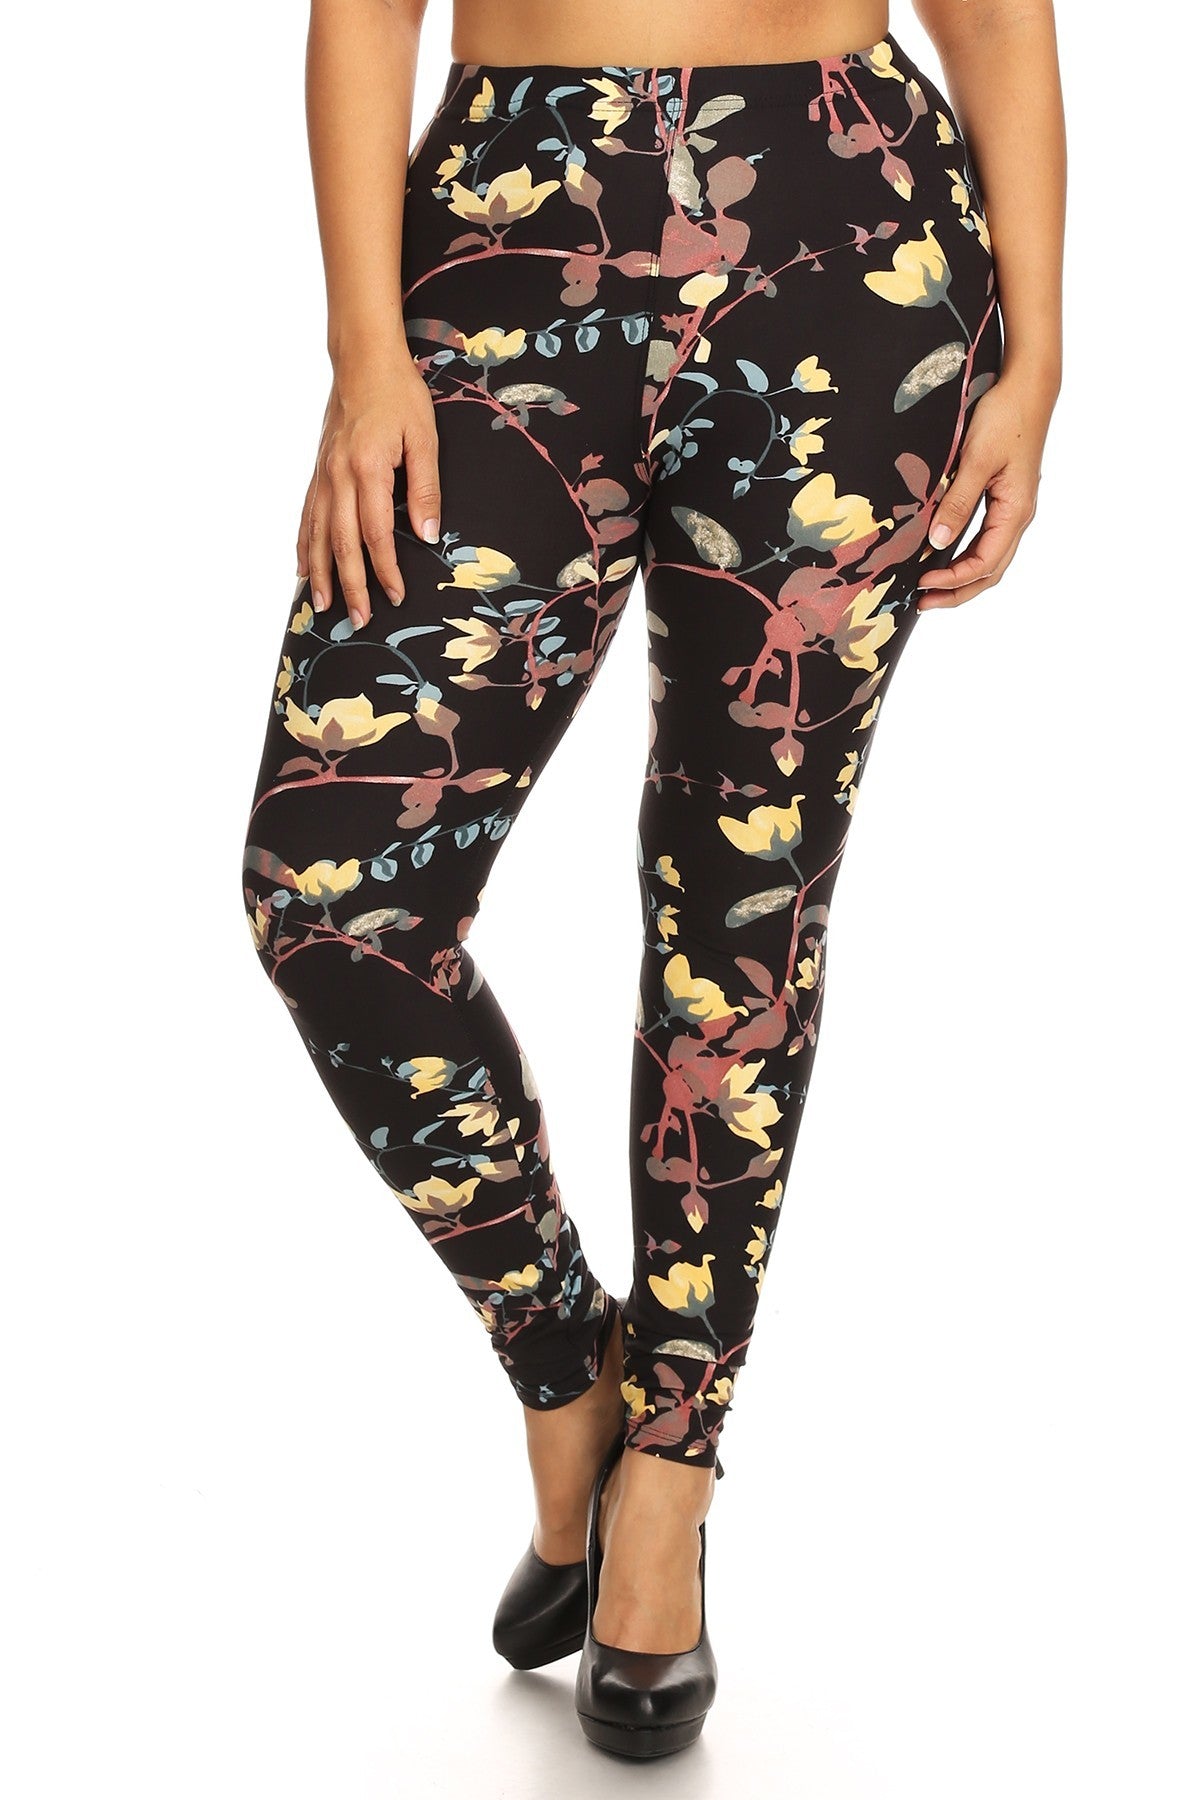 Plus Floral Print, Full Length Leggings In A Slim Fitting Style With A Banded High Waist